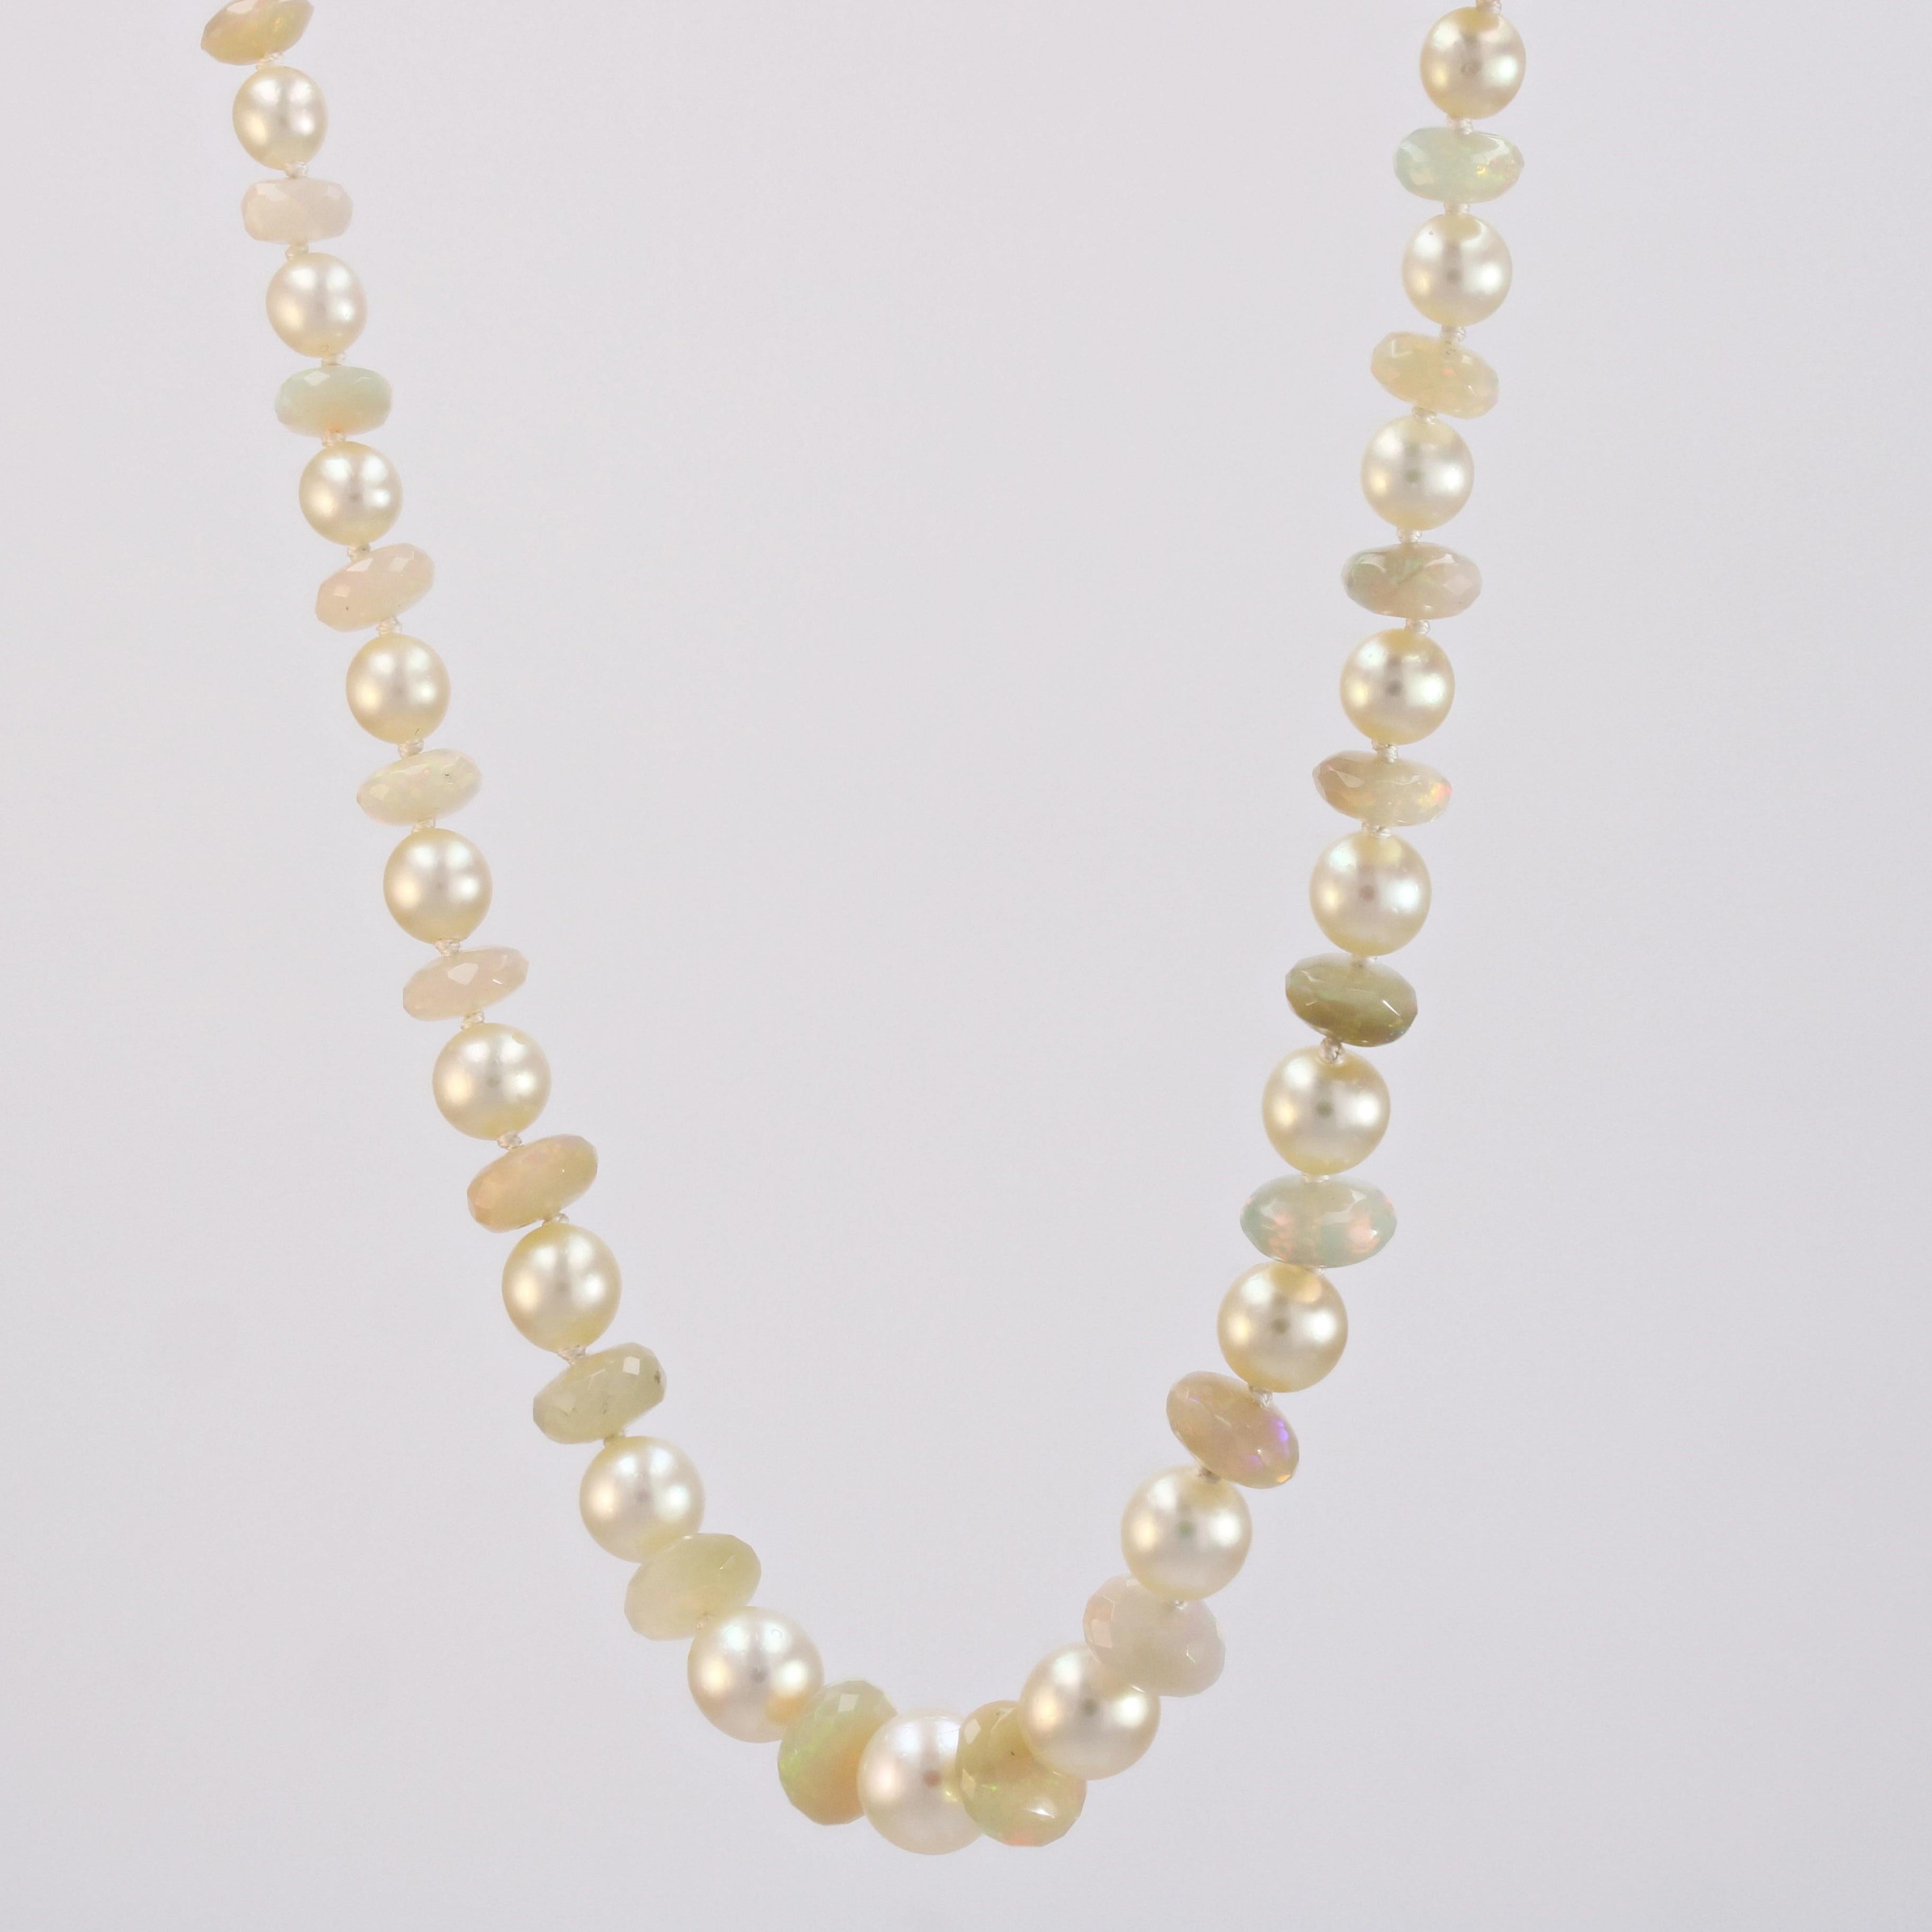 Modern Cultured Pearls Opals 18 Karat White Gold Clasp Necklace For Sale 1